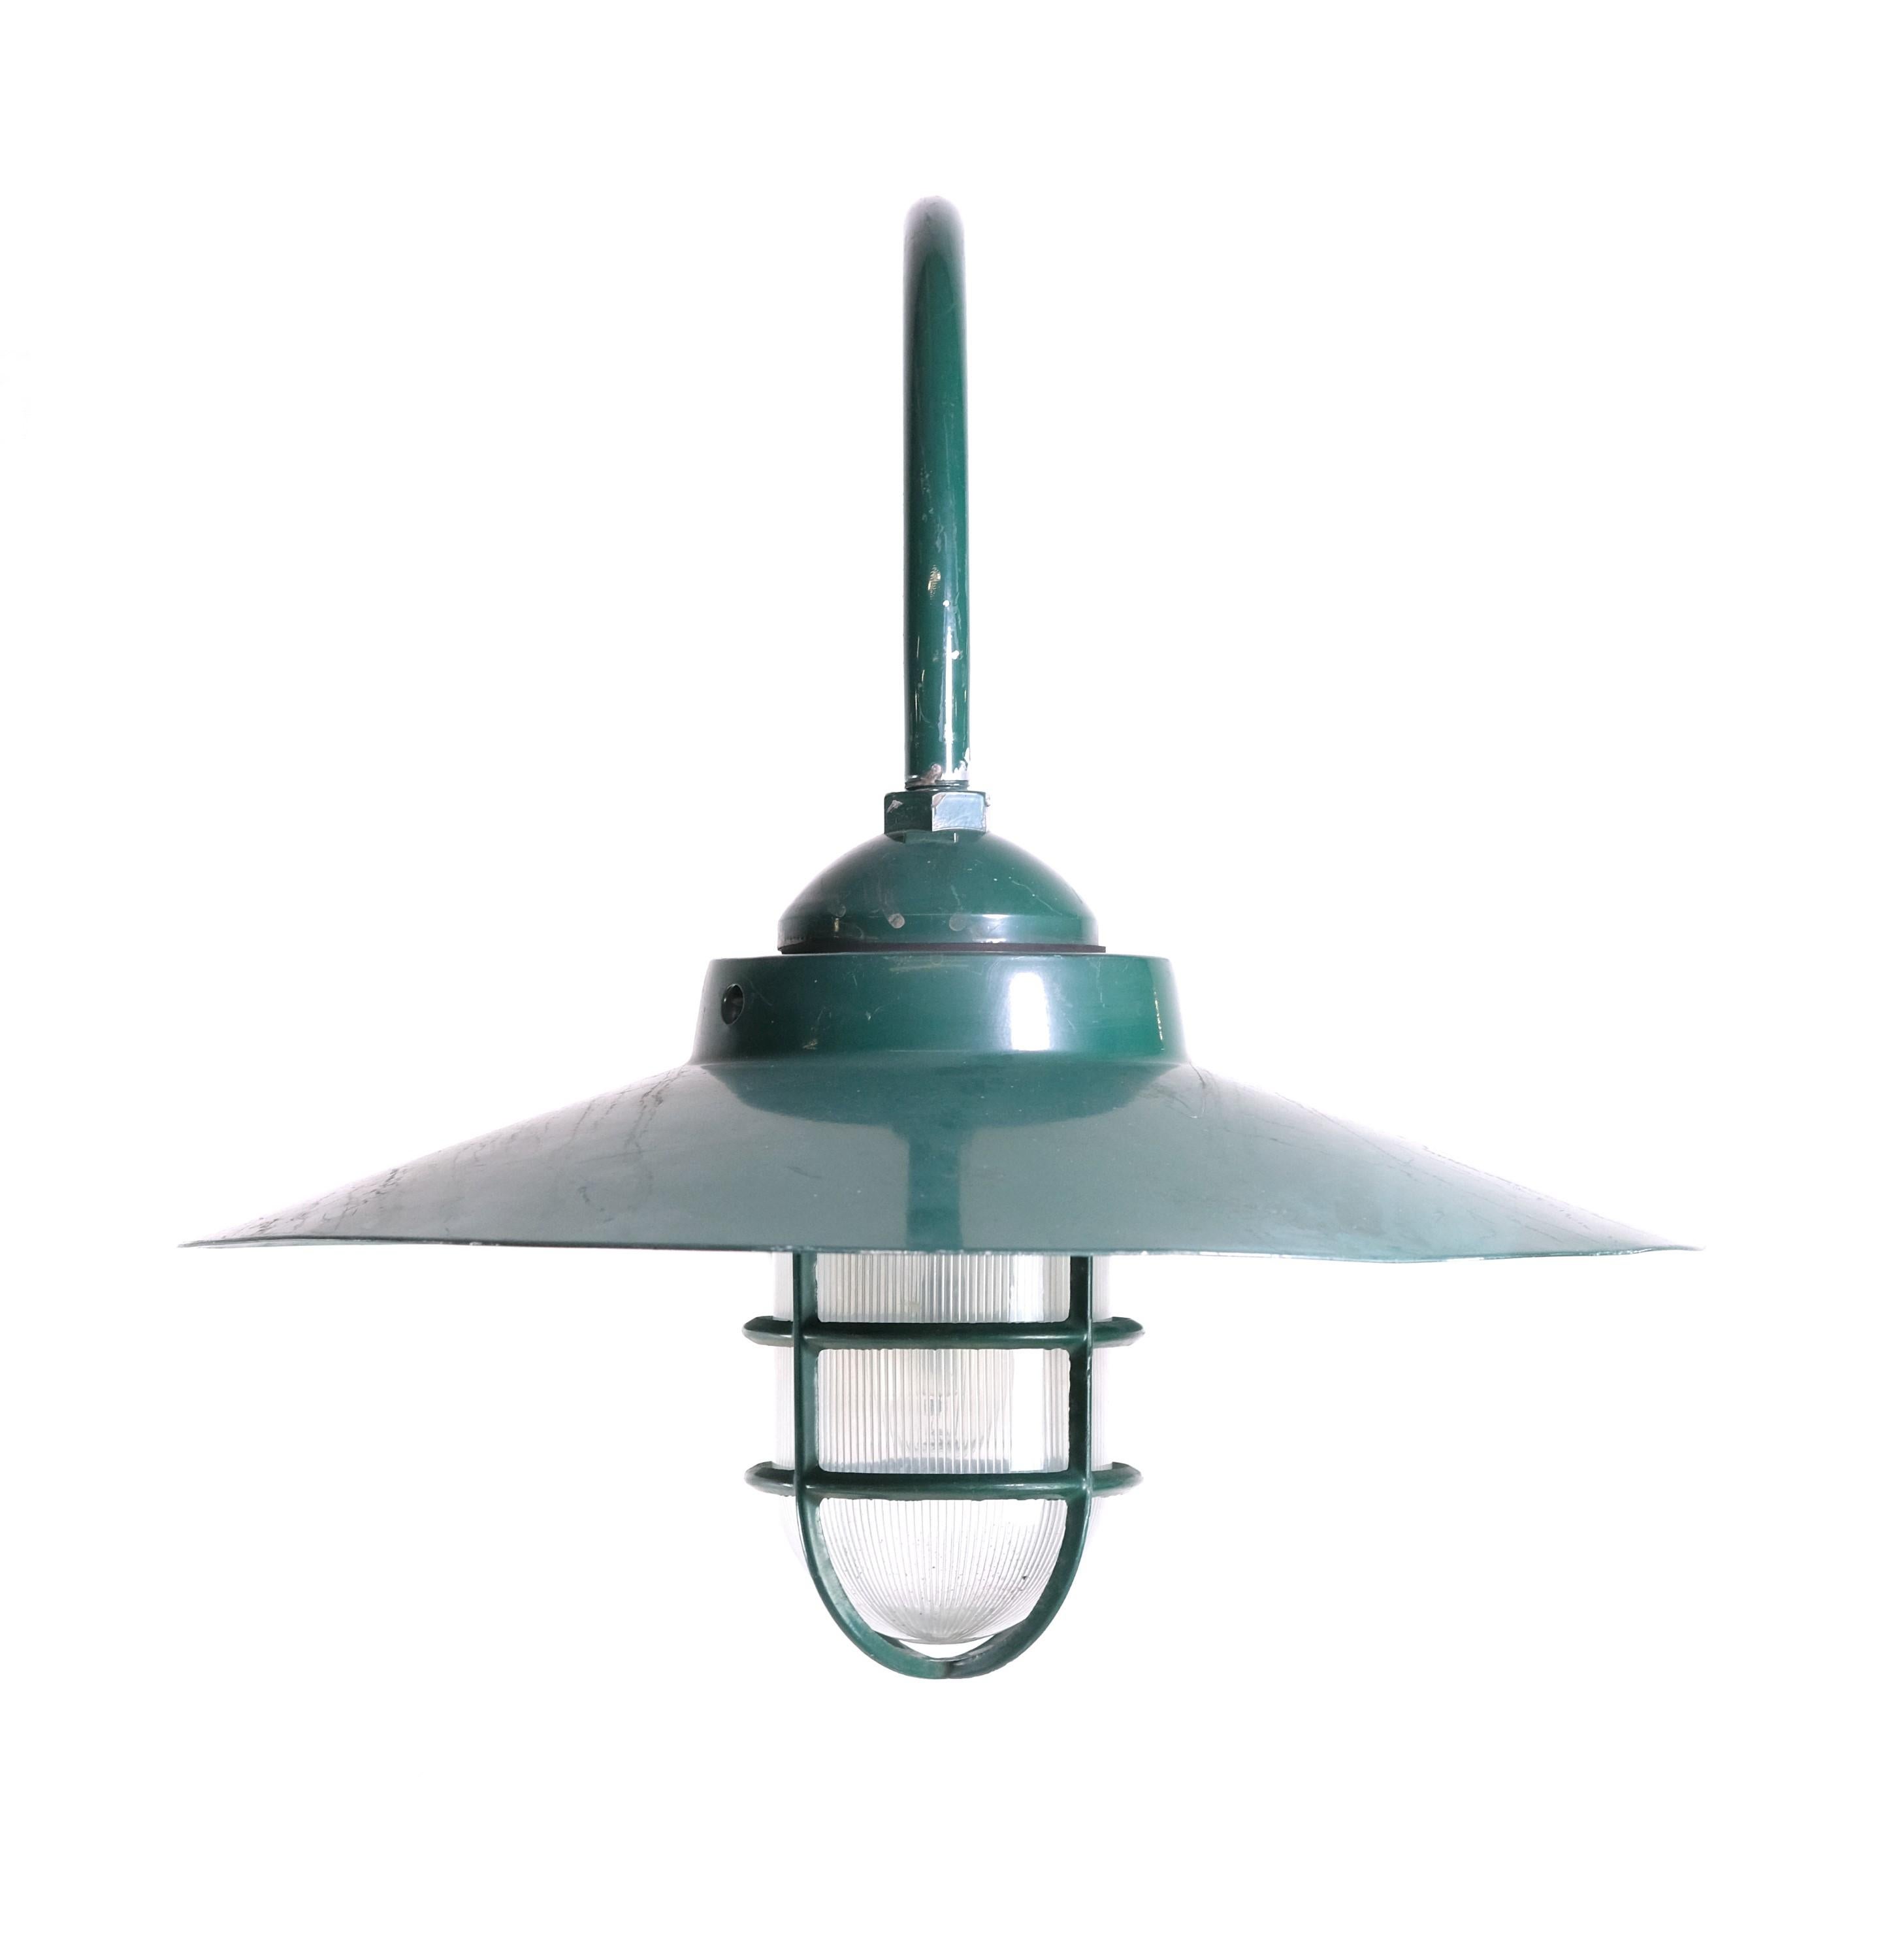 Almost new exterior wall sconce manufactured out of aluminum and steel. Light comes with a protective cage and has a ribbed glass globe. Green enamel finish. Cleaned and restored. Small quantity available at time of posting. Please inquire. Priced